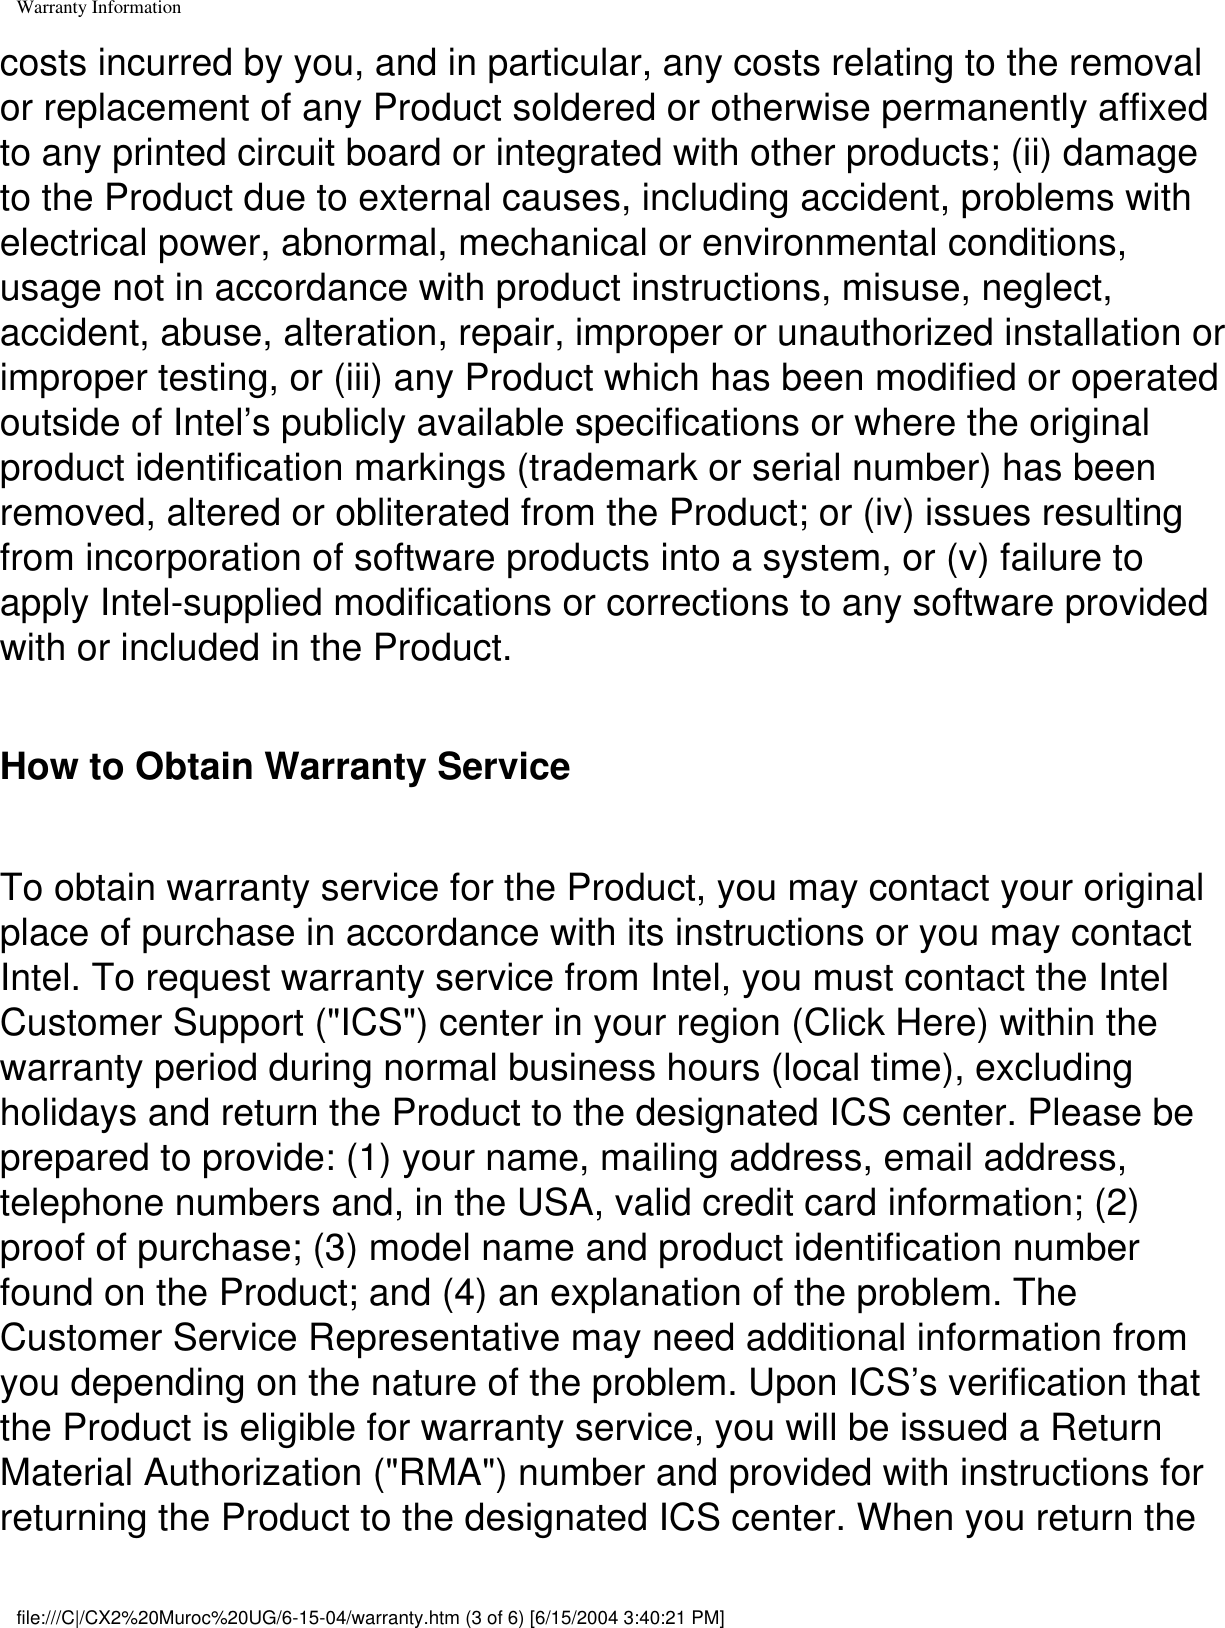 Warranty Informationcosts incurred by you, and in particular, any costs relating to the removal or replacement of any Product soldered or otherwise permanently affixed to any printed circuit board or integrated with other products; (ii) damage to the Product due to external causes, including accident, problems with electrical power, abnormal, mechanical or environmental conditions, usage not in accordance with product instructions, misuse, neglect, accident, abuse, alteration, repair, improper or unauthorized installation or improper testing, or (iii) any Product which has been modified or operated outside of Intel’s publicly available specifications or where the original product identification markings (trademark or serial number) has been removed, altered or obliterated from the Product; or (iv) issues resulting from incorporation of software products into a system, or (v) failure to apply Intel-supplied modifications or corrections to any software provided with or included in the Product. How to Obtain Warranty Service To obtain warranty service for the Product, you may contact your original place of purchase in accordance with its instructions or you may contact Intel. To request warranty service from Intel, you must contact the Intel Customer Support (&quot;ICS&quot;) center in your region (Click Here) within the warranty period during normal business hours (local time), excluding holidays and return the Product to the designated ICS center. Please be prepared to provide: (1) your name, mailing address, email address, telephone numbers and, in the USA, valid credit card information; (2) proof of purchase; (3) model name and product identification number found on the Product; and (4) an explanation of the problem. The Customer Service Representative may need additional information from you depending on the nature of the problem. Upon ICS’s verification that the Product is eligible for warranty service, you will be issued a Return Material Authorization (&quot;RMA&quot;) number and provided with instructions for returning the Product to the designated ICS center. When you return the file:///C|/CX2%20Muroc%20UG/6-15-04/warranty.htm (3 of 6) [6/15/2004 3:40:21 PM]